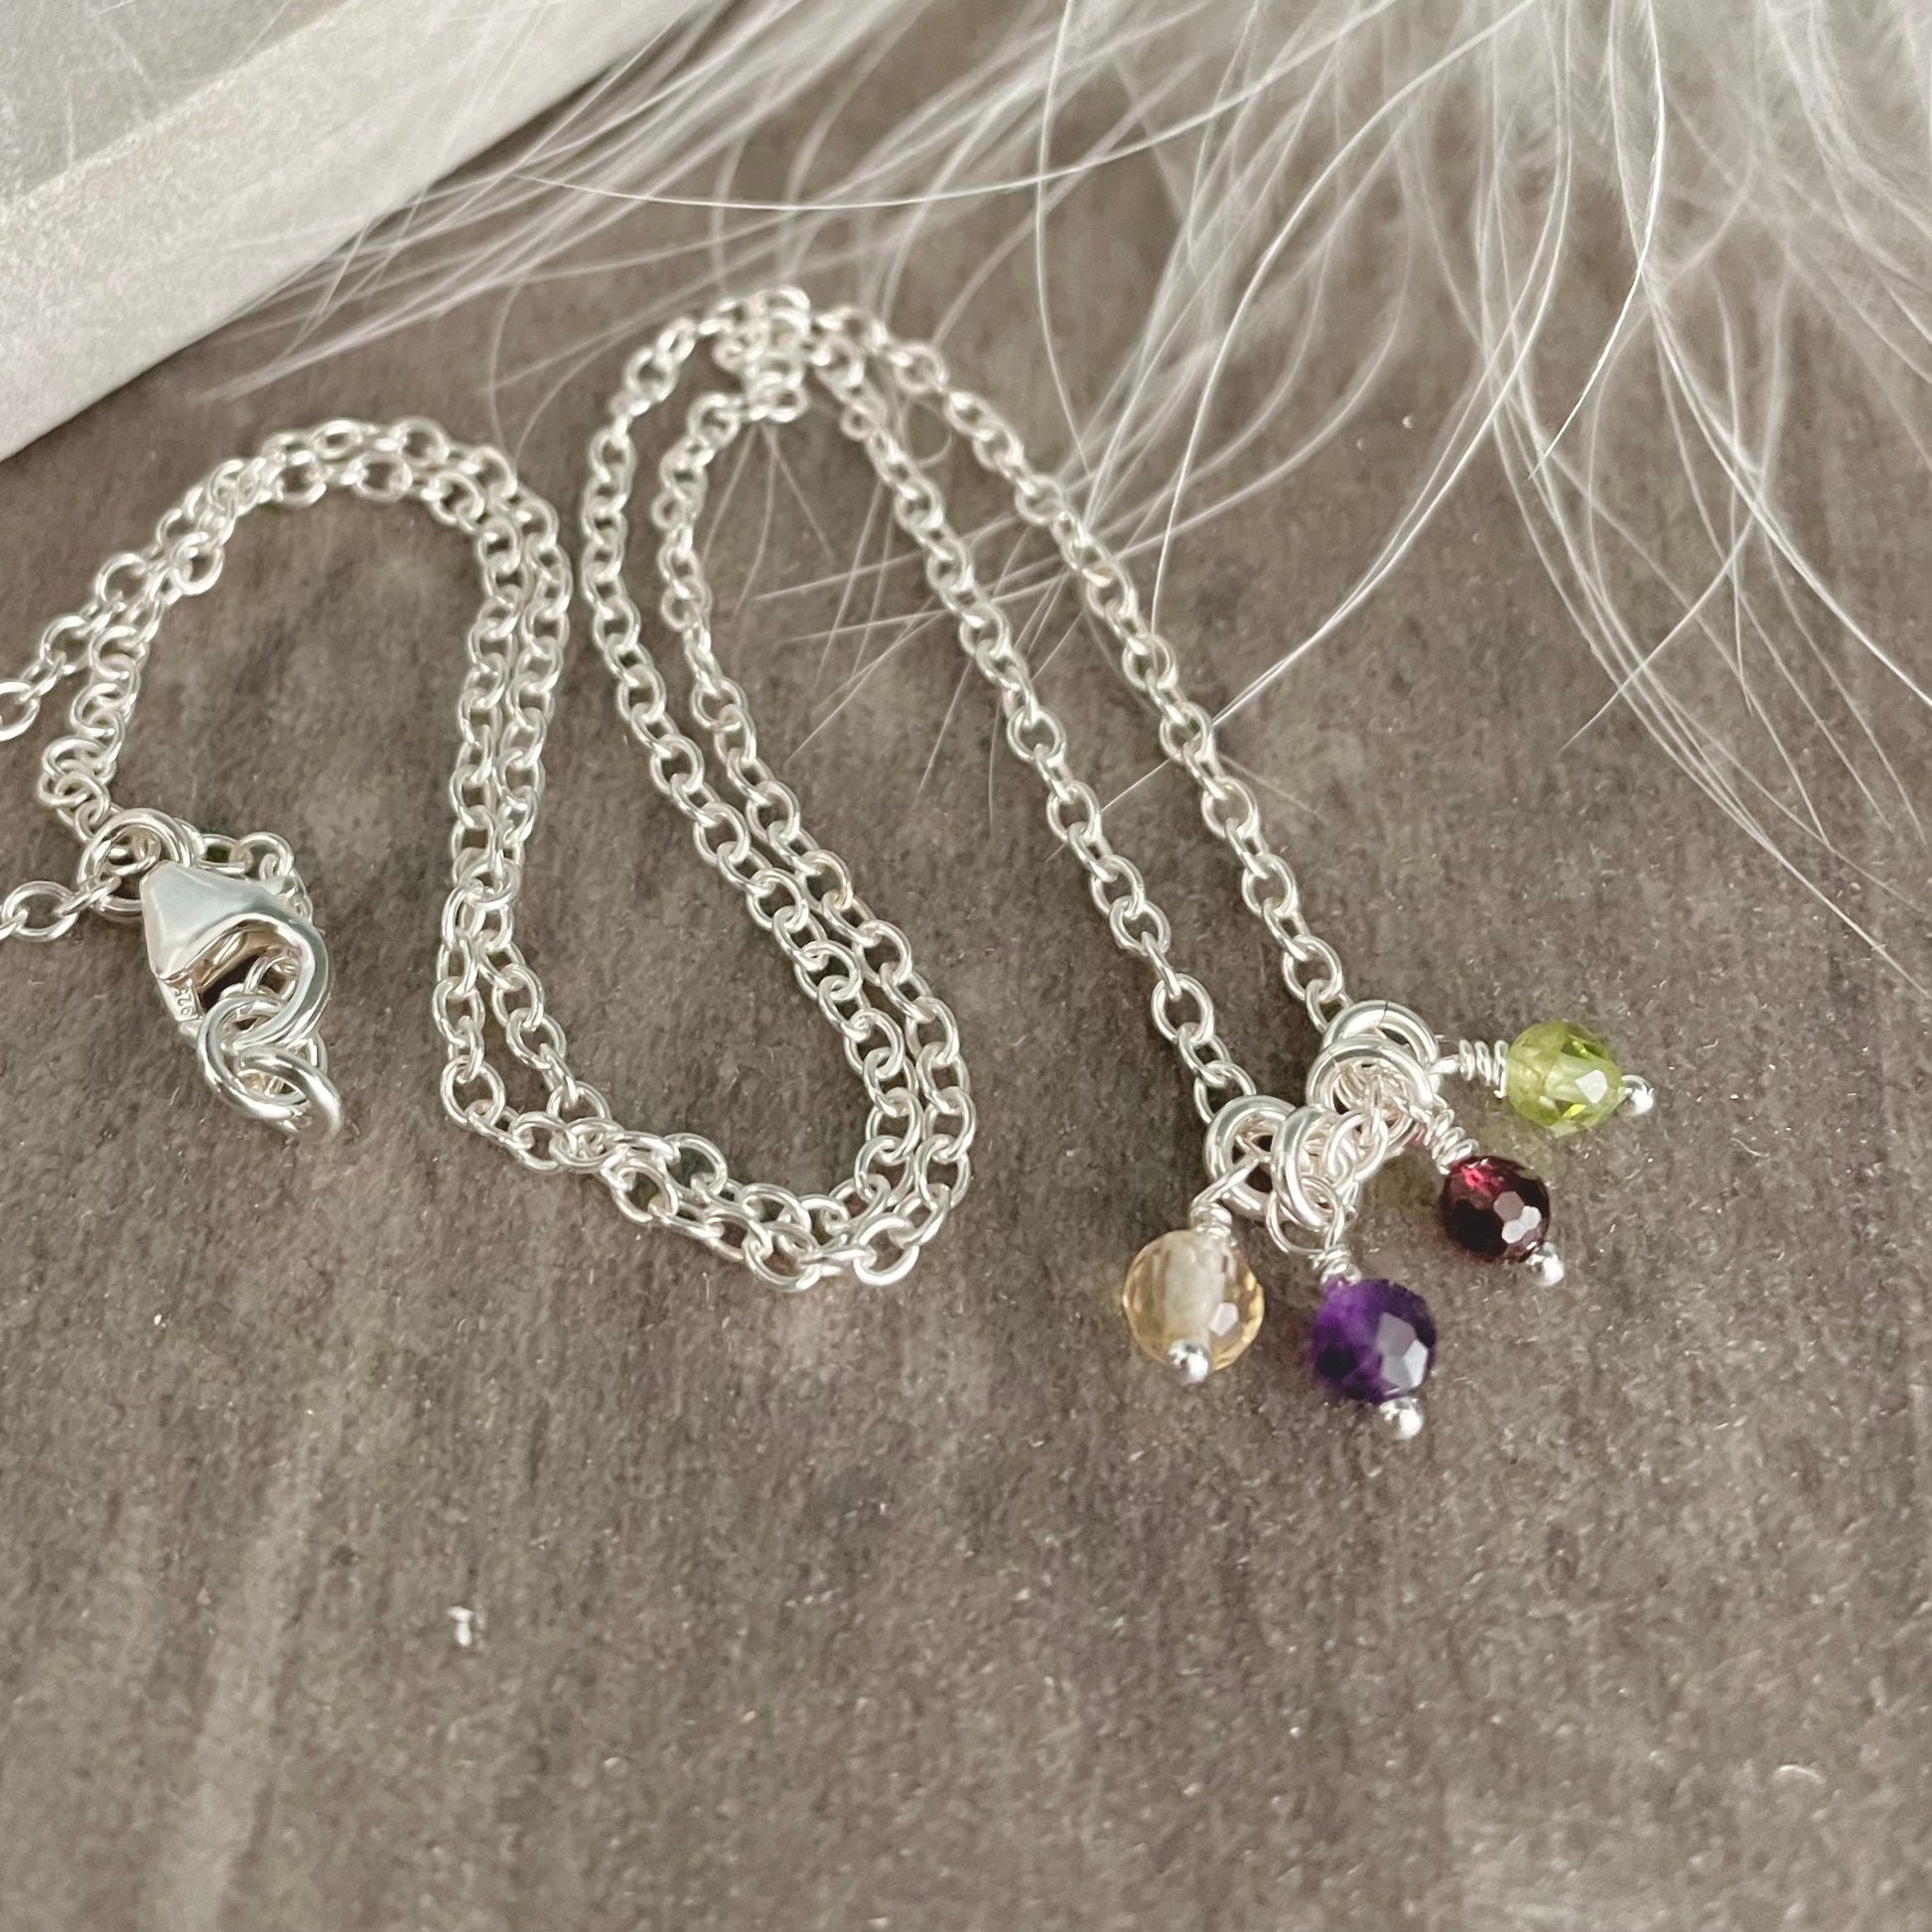 Very Dainty Family Birthstone Charm Necklace, Family Jewellery for Mum in Sterling Silver